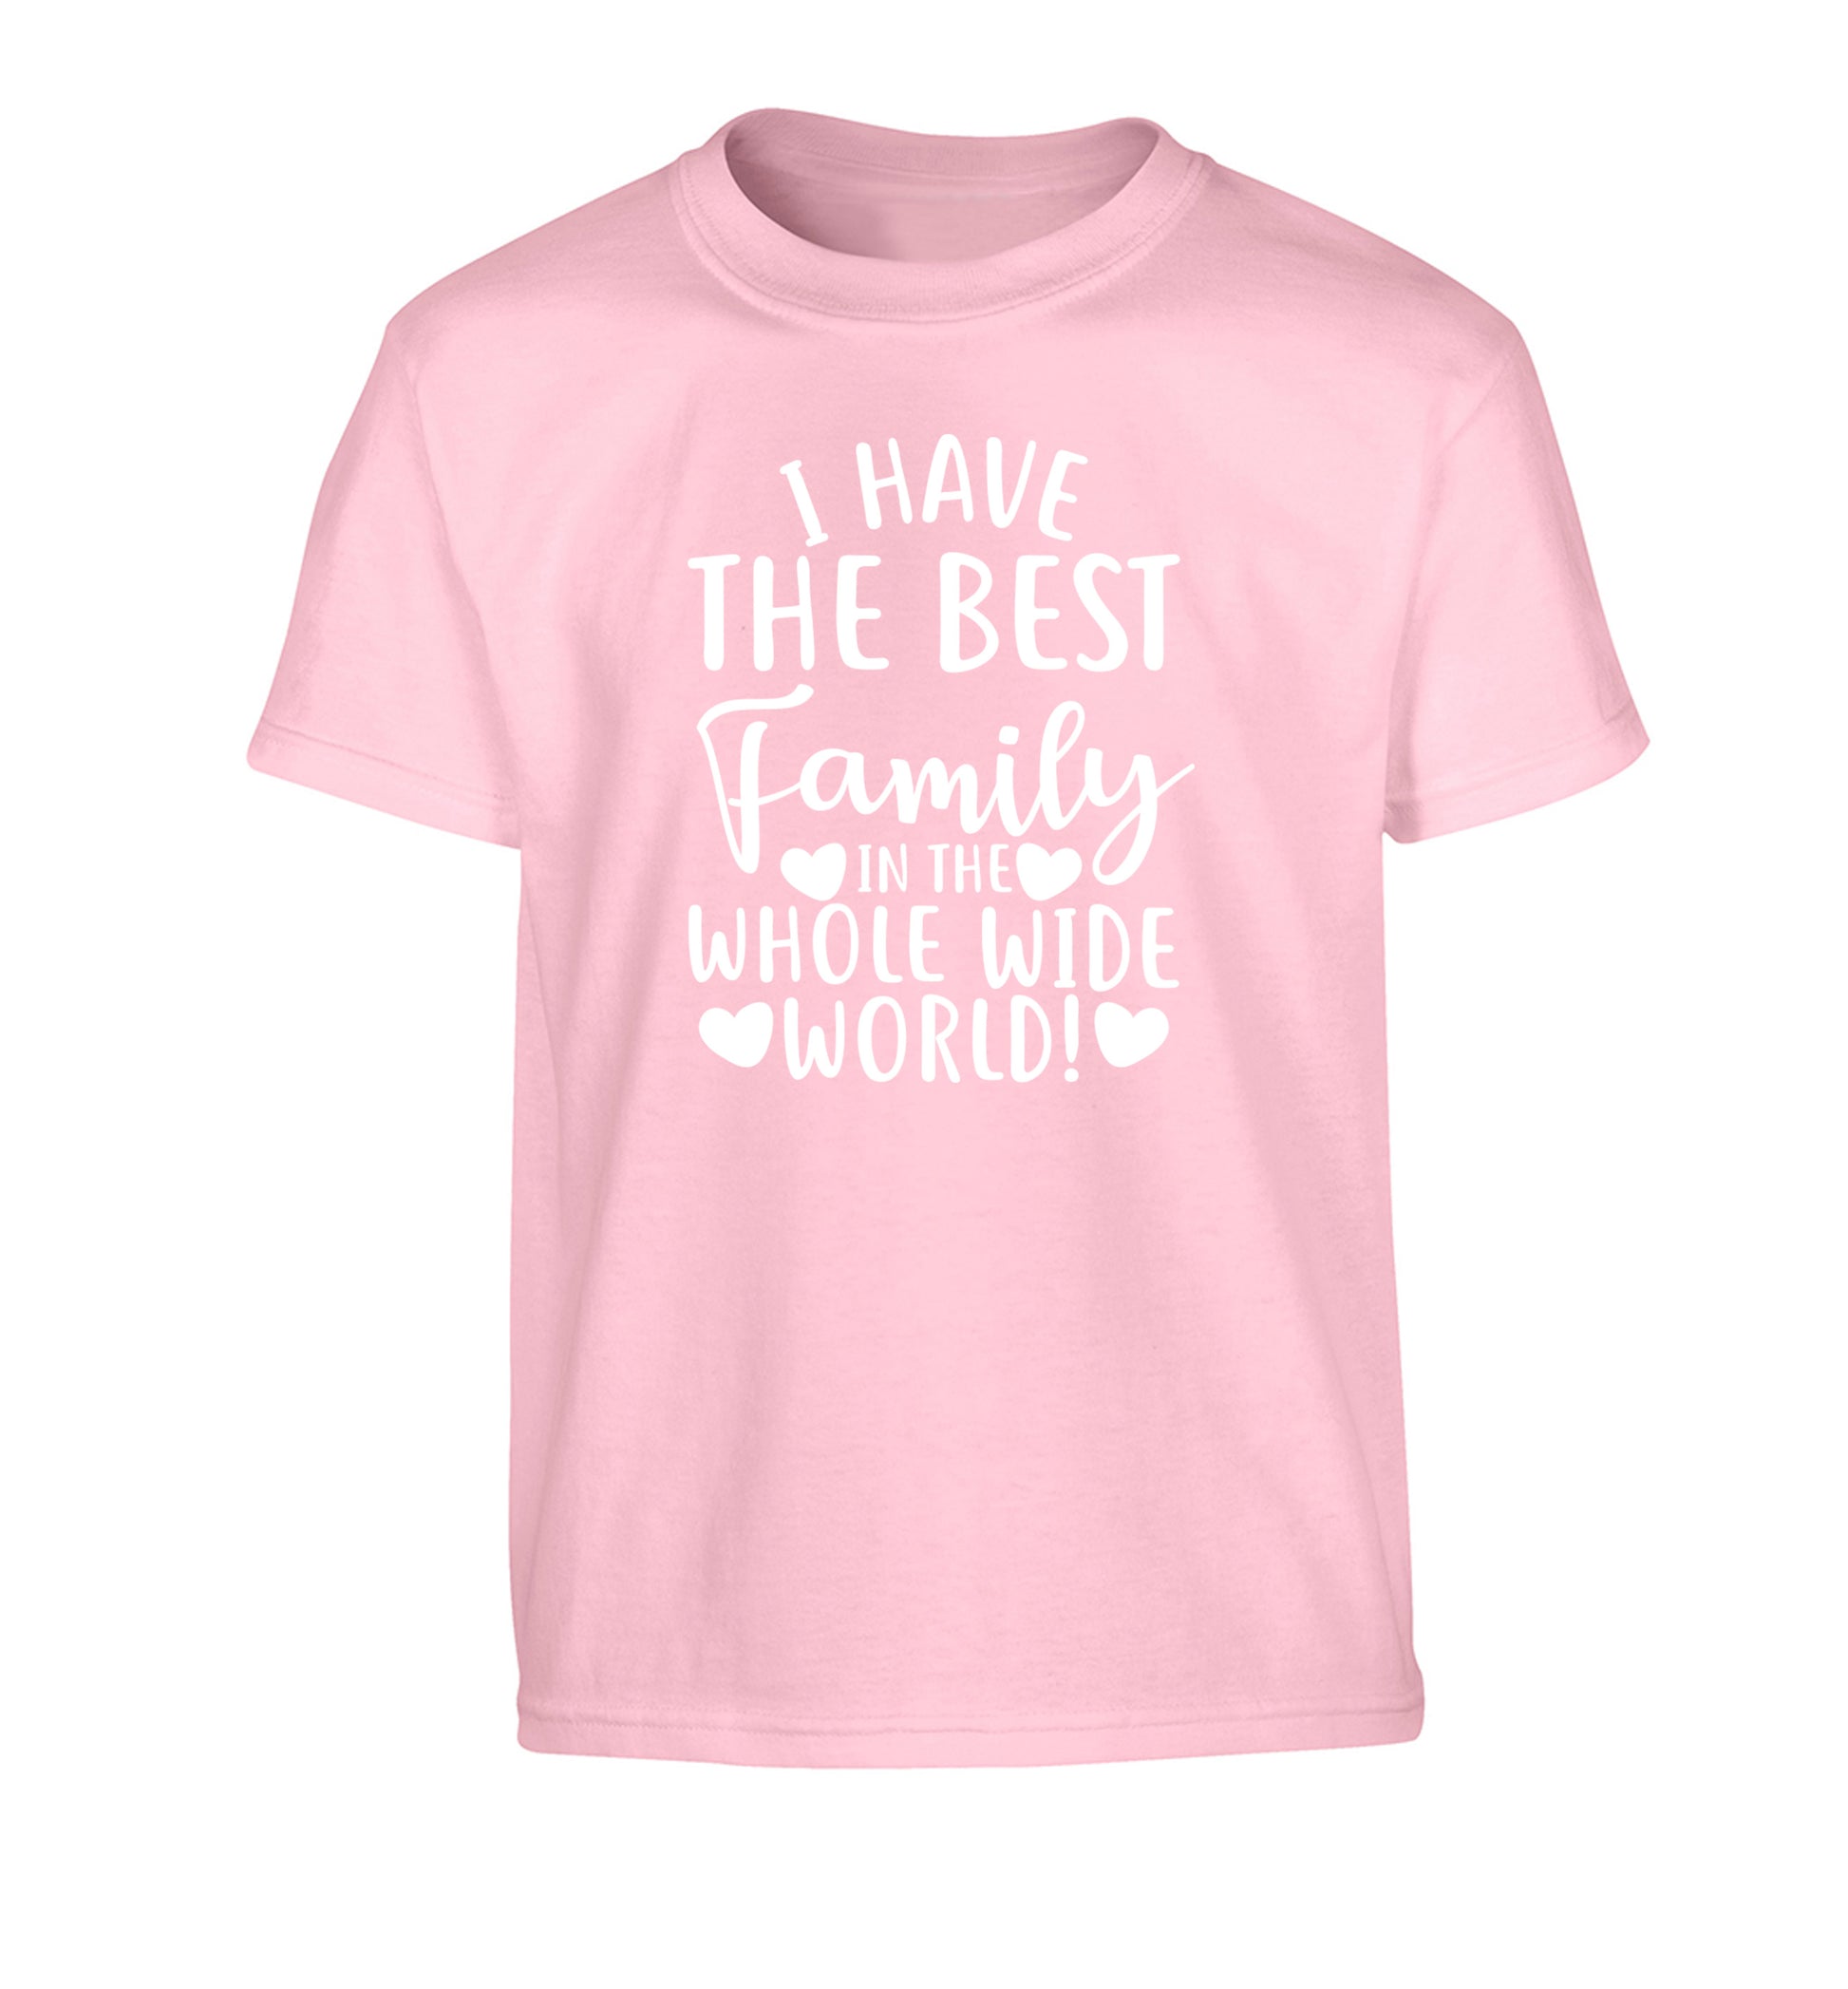 I have the best family in the whole wide world! Children's light pink Tshirt 12-13 Years